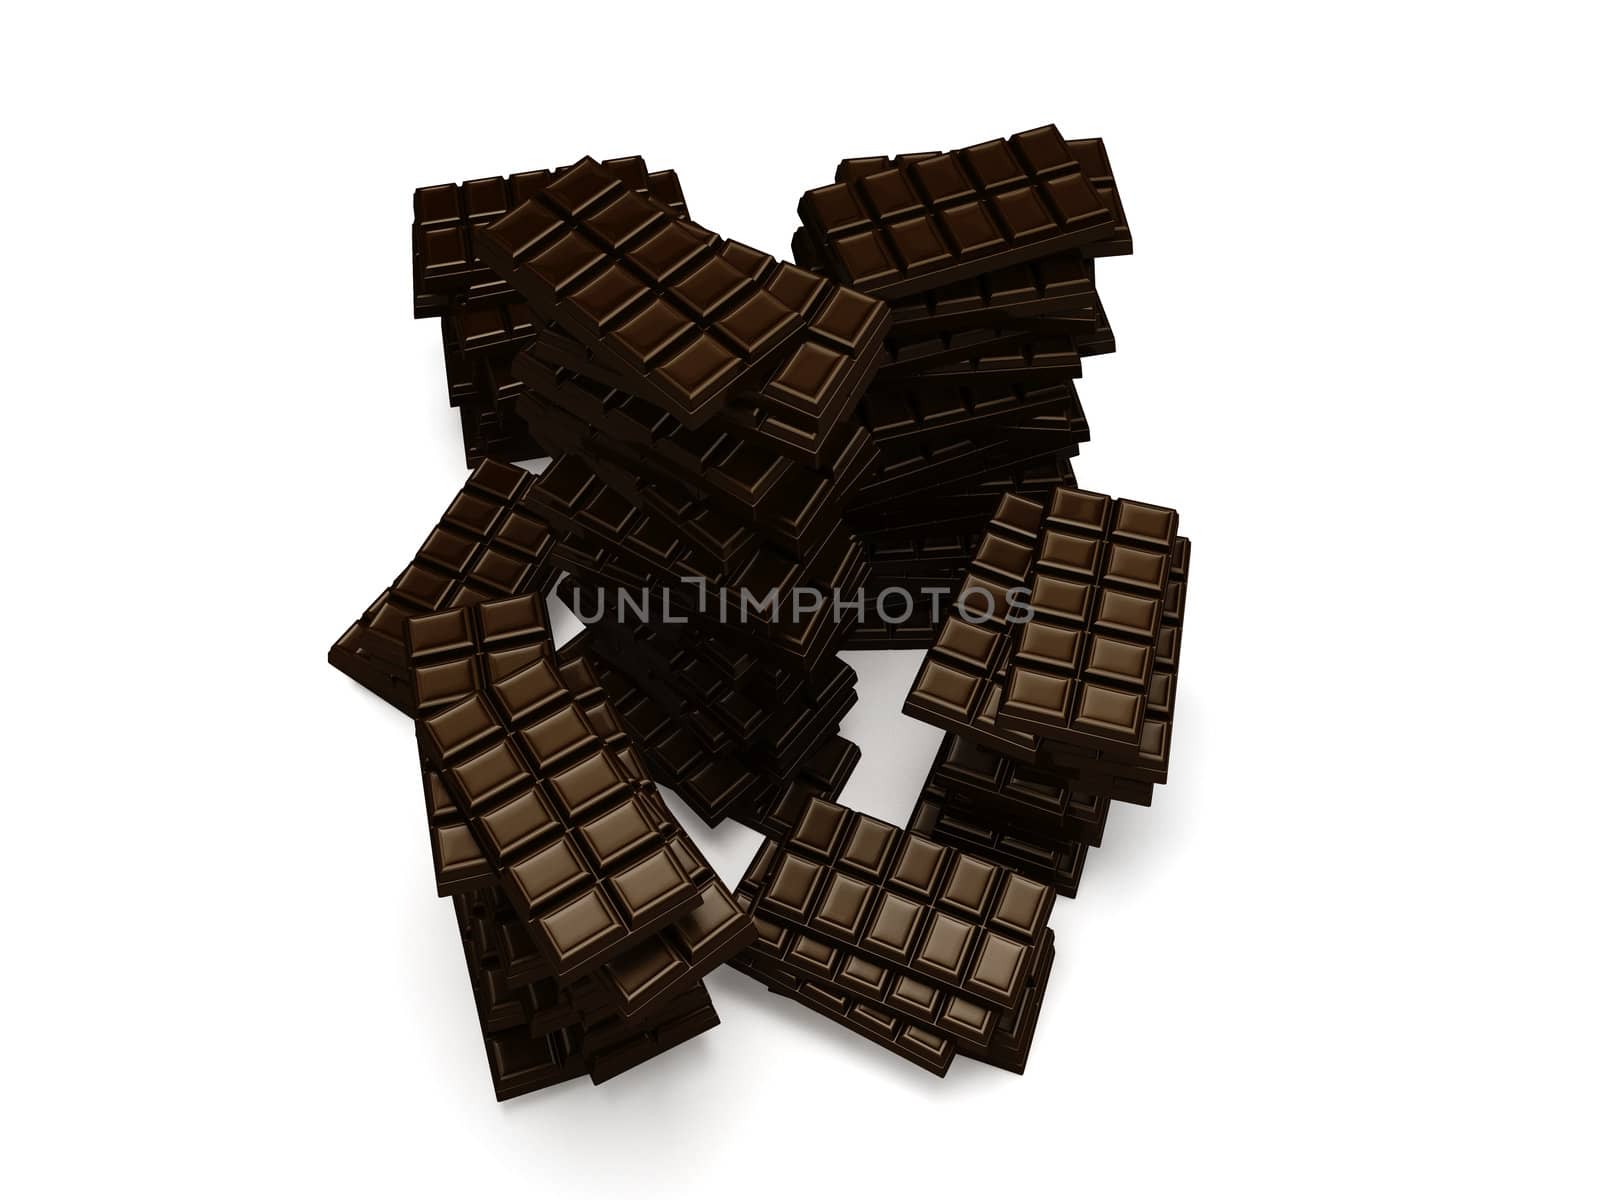 Some Stacks of many Chocolate Bars with a white background by shkyo30